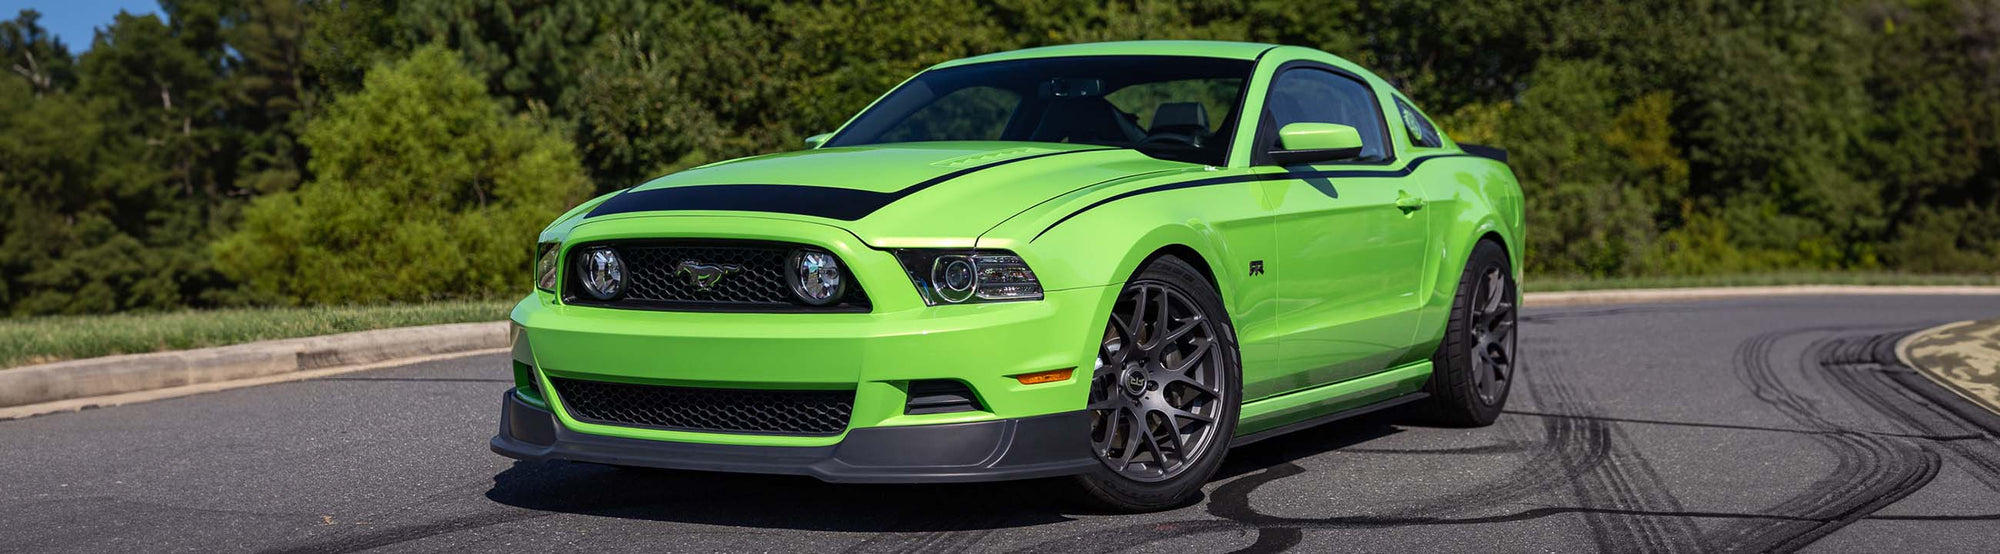 2013 Mustang RTR equipped with RTR parts